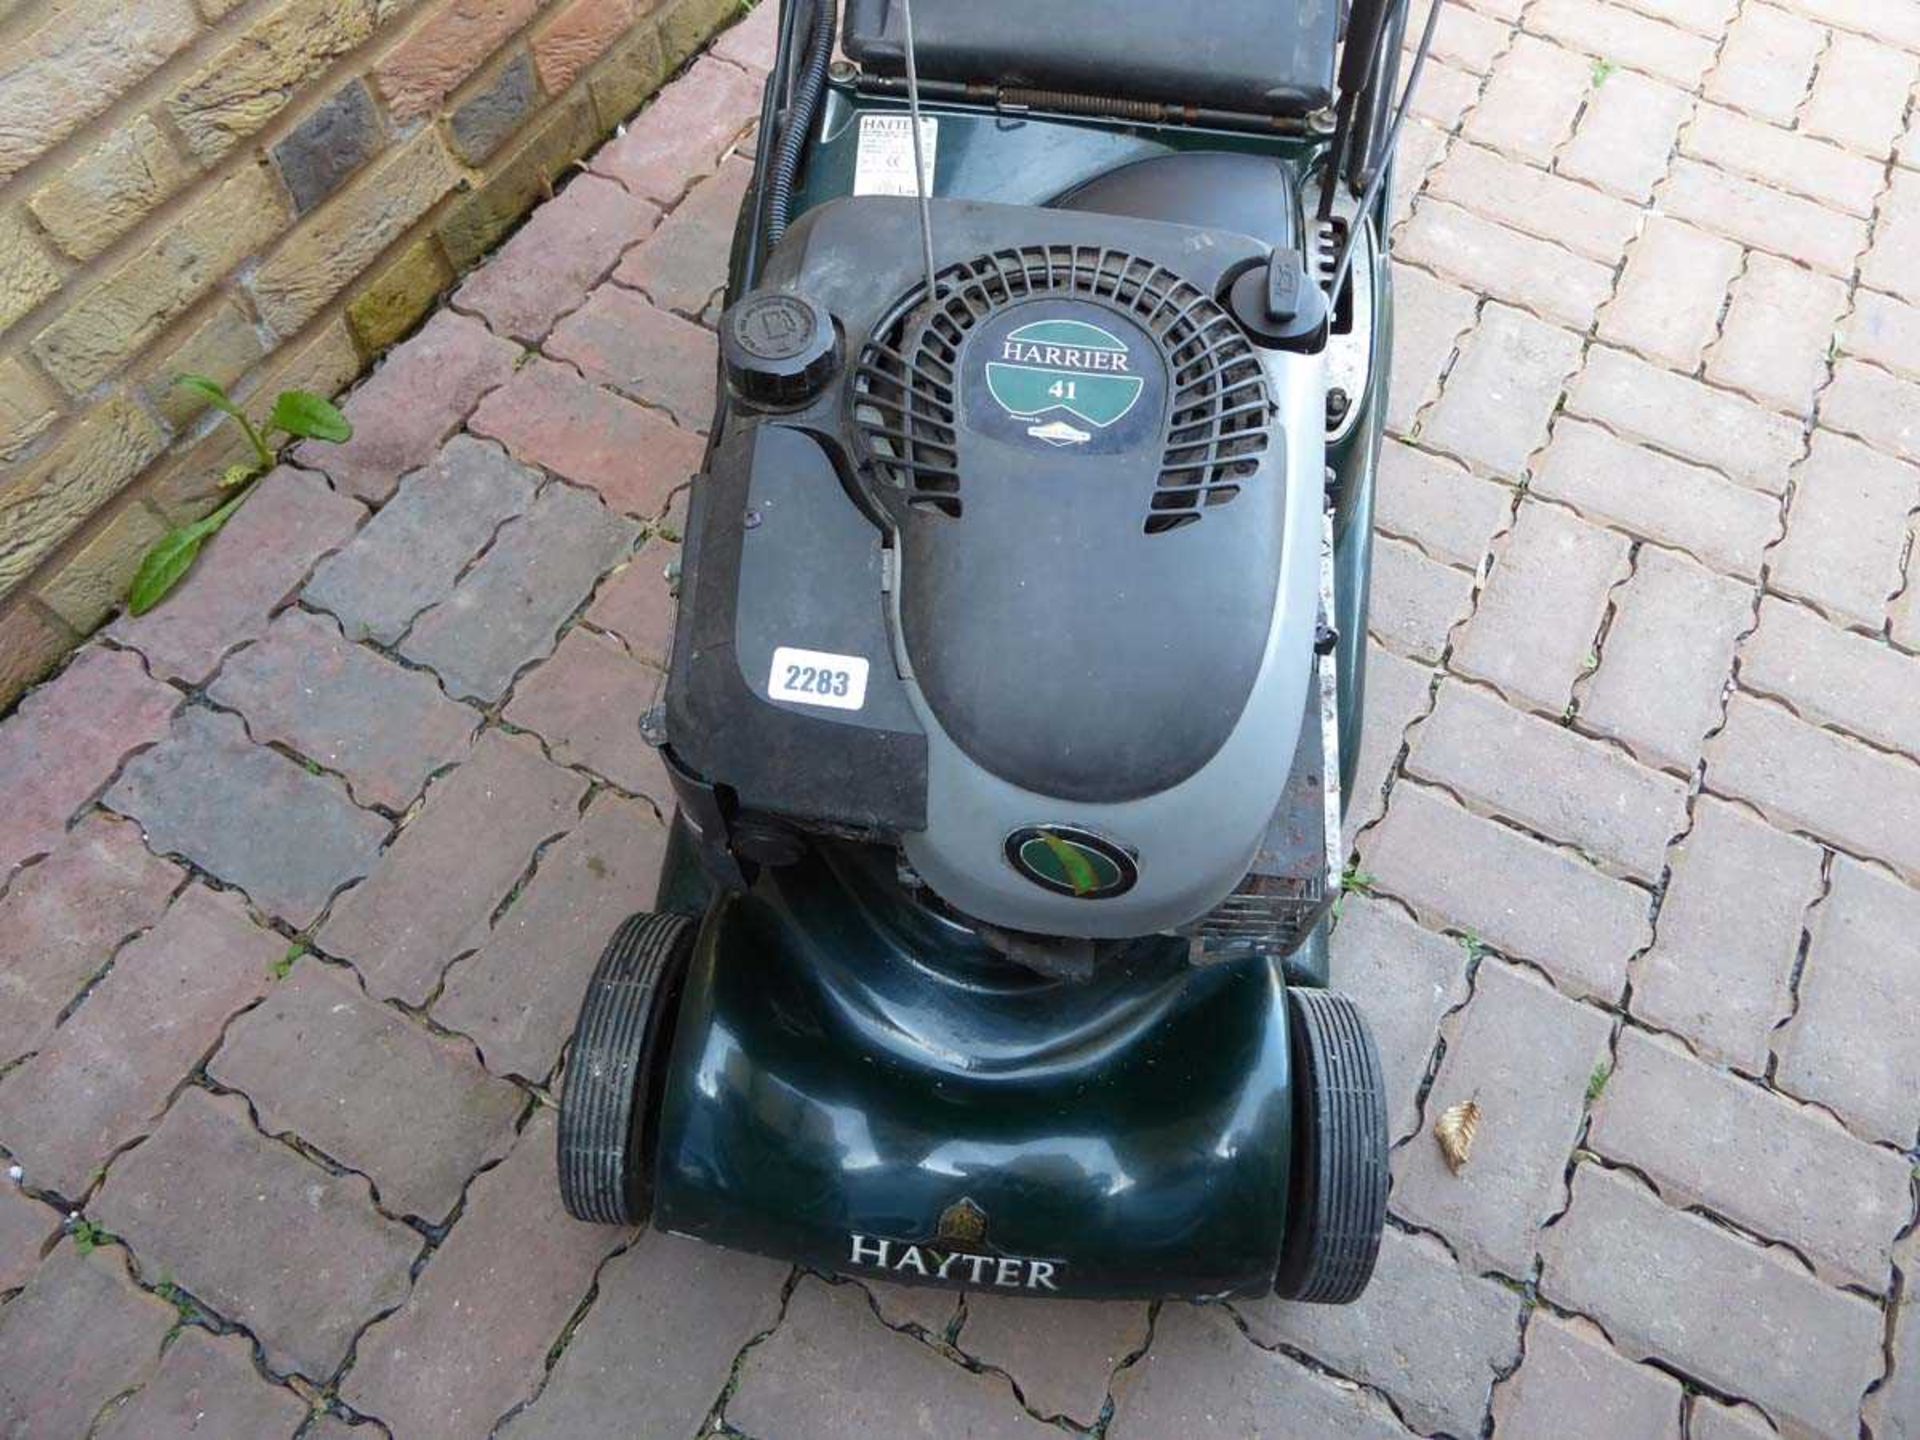 Hayter Harrier 41 self propelled petrol lawn mower with rear roller attachments - Image 2 of 2